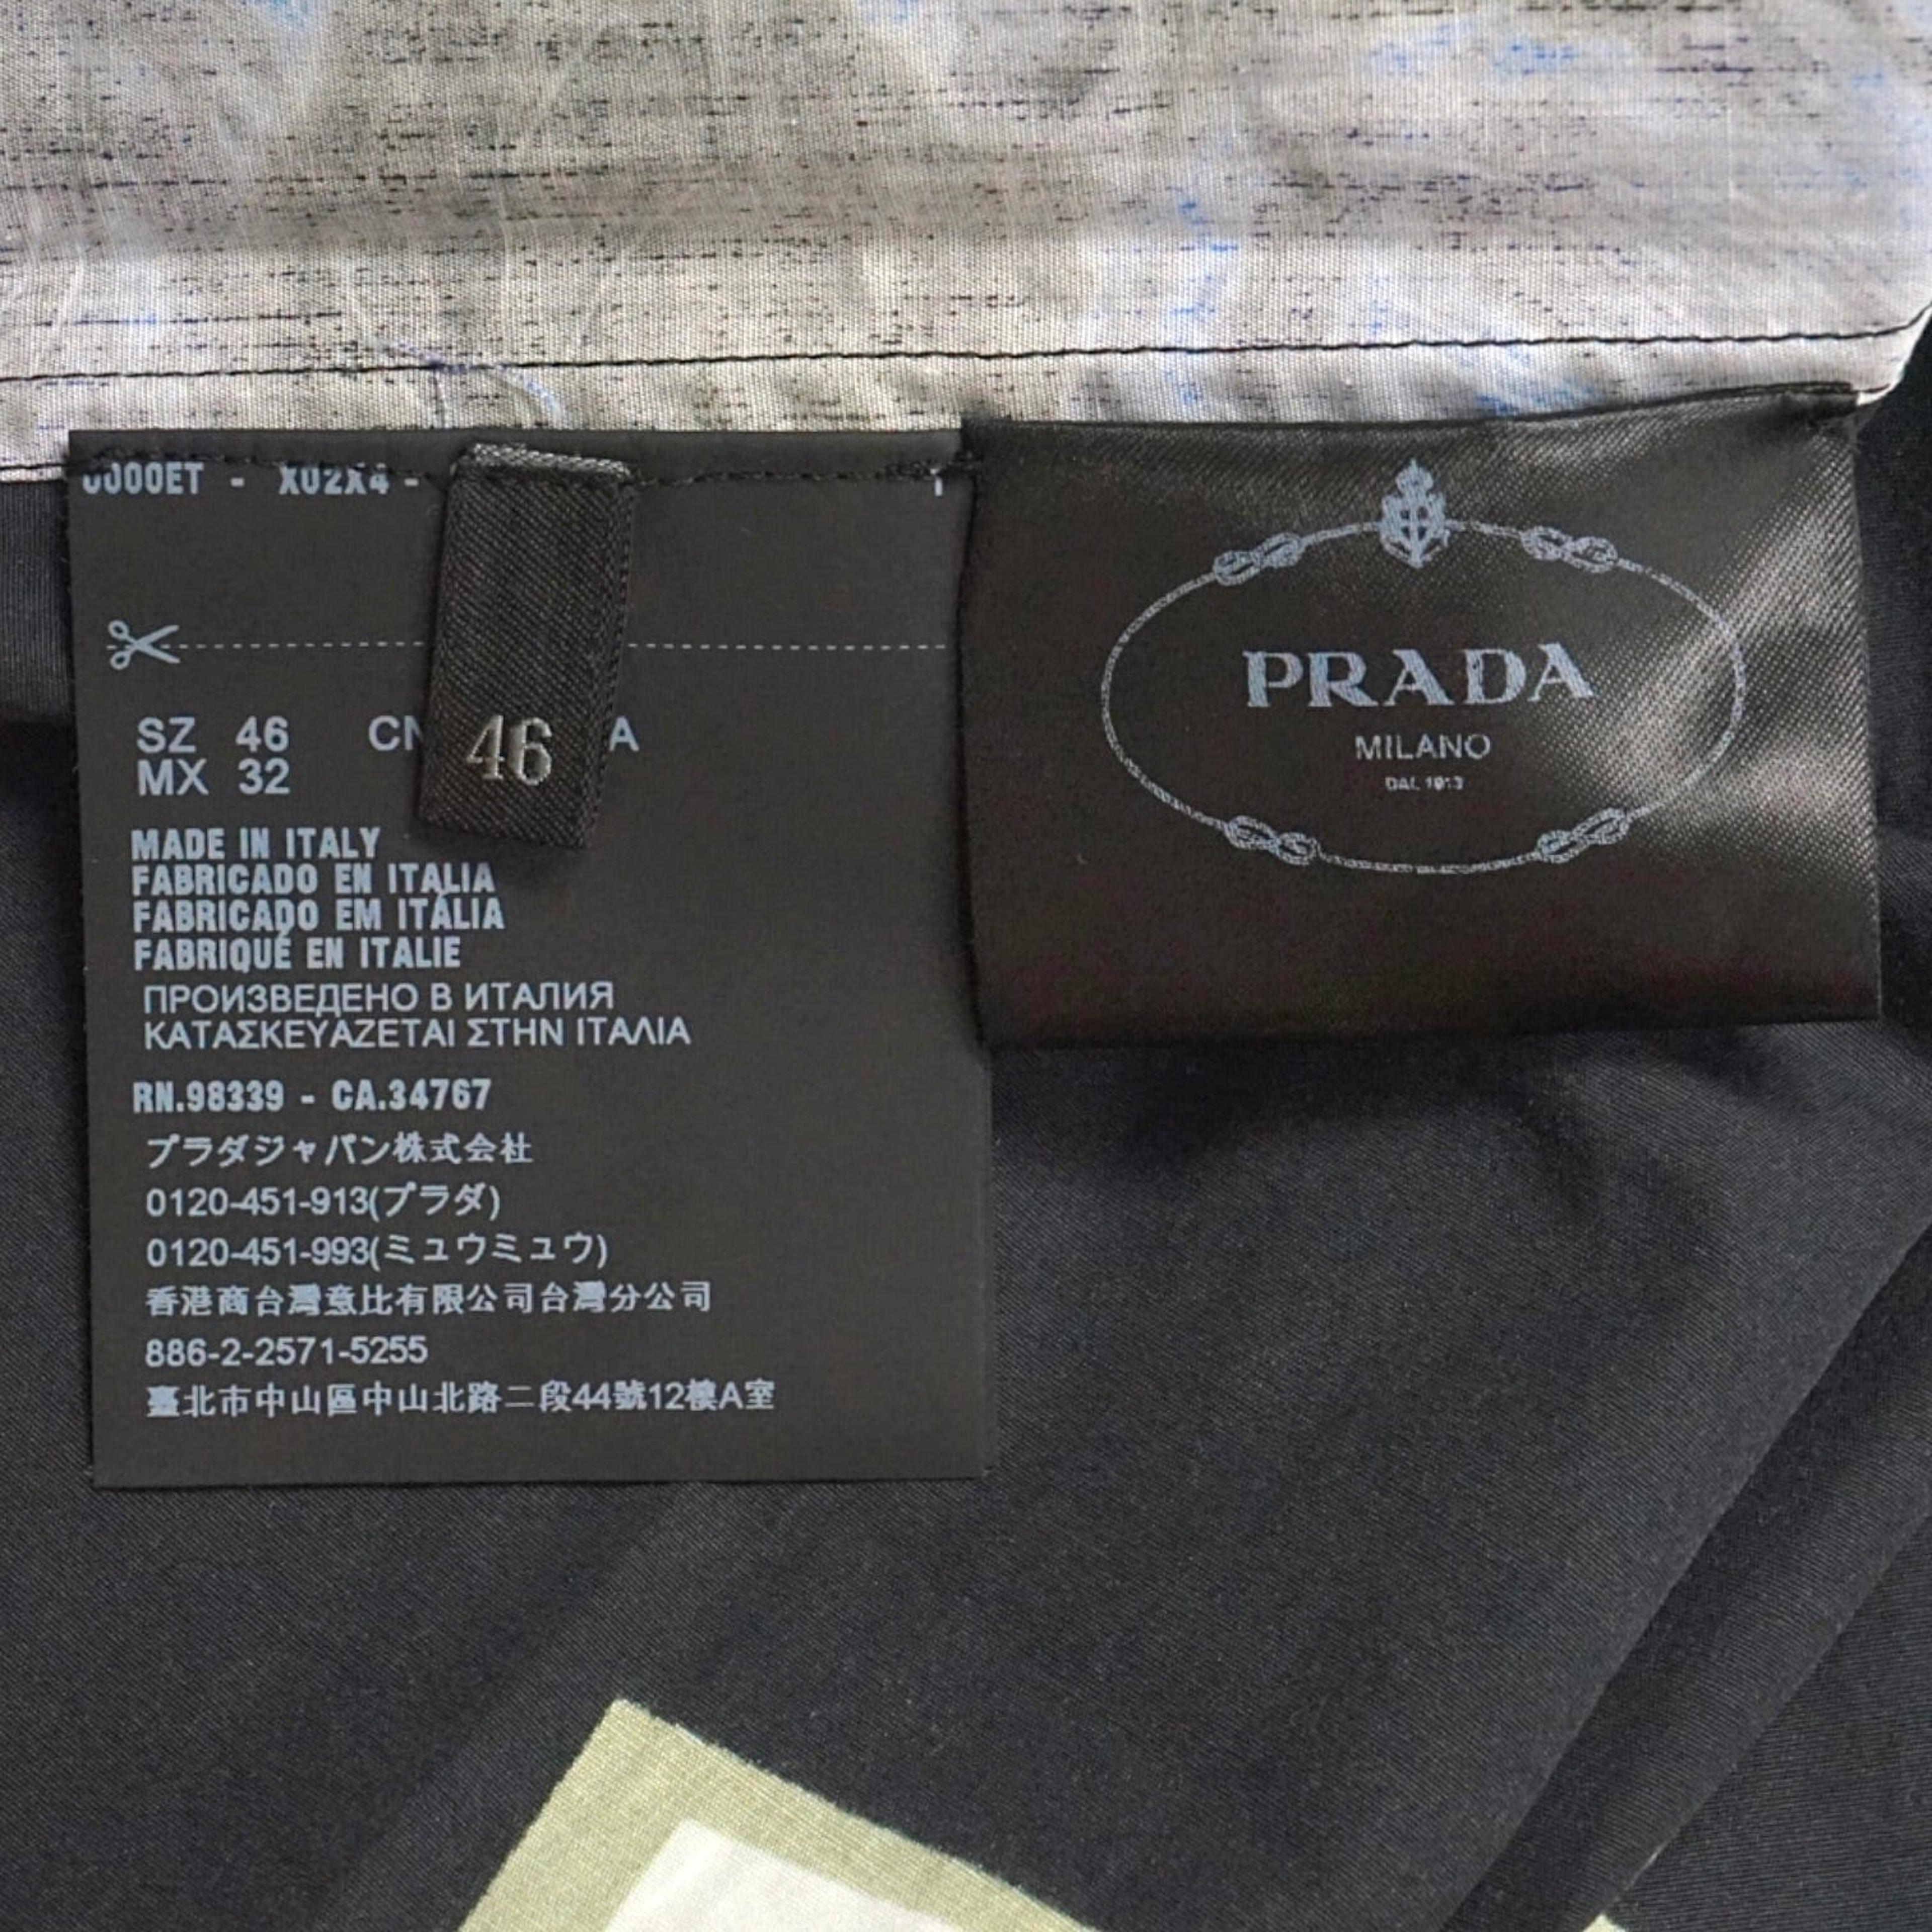 Alternate View 5 of Prada Electric Heart Frankenstein Button Up Black Pre-Owned